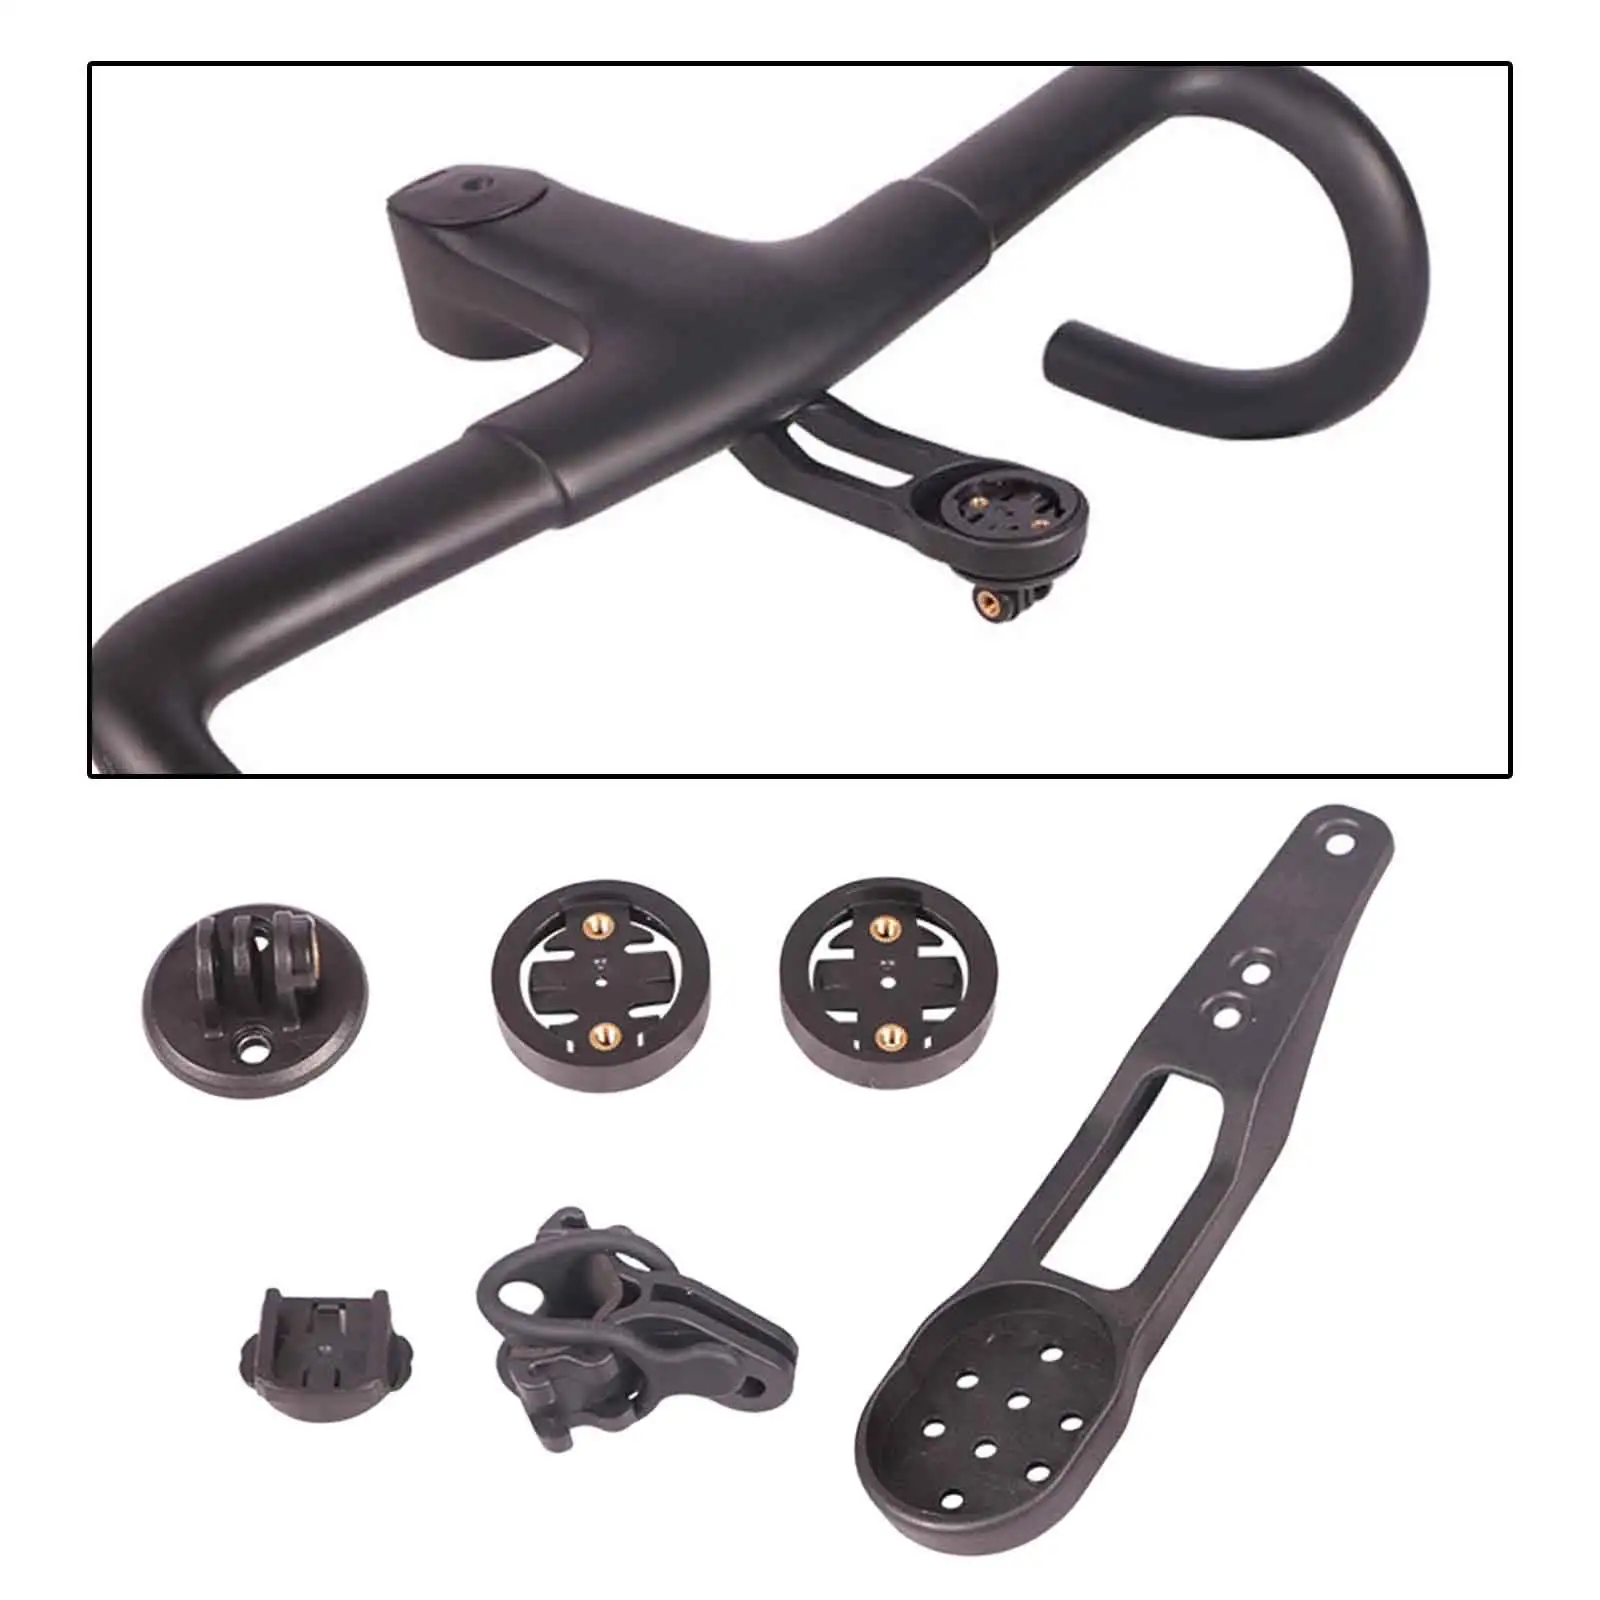 Handlebar Stem Extension Road Bike Bicycle Accessories Equiment for Sports Camera Easy Operation Handy Carry